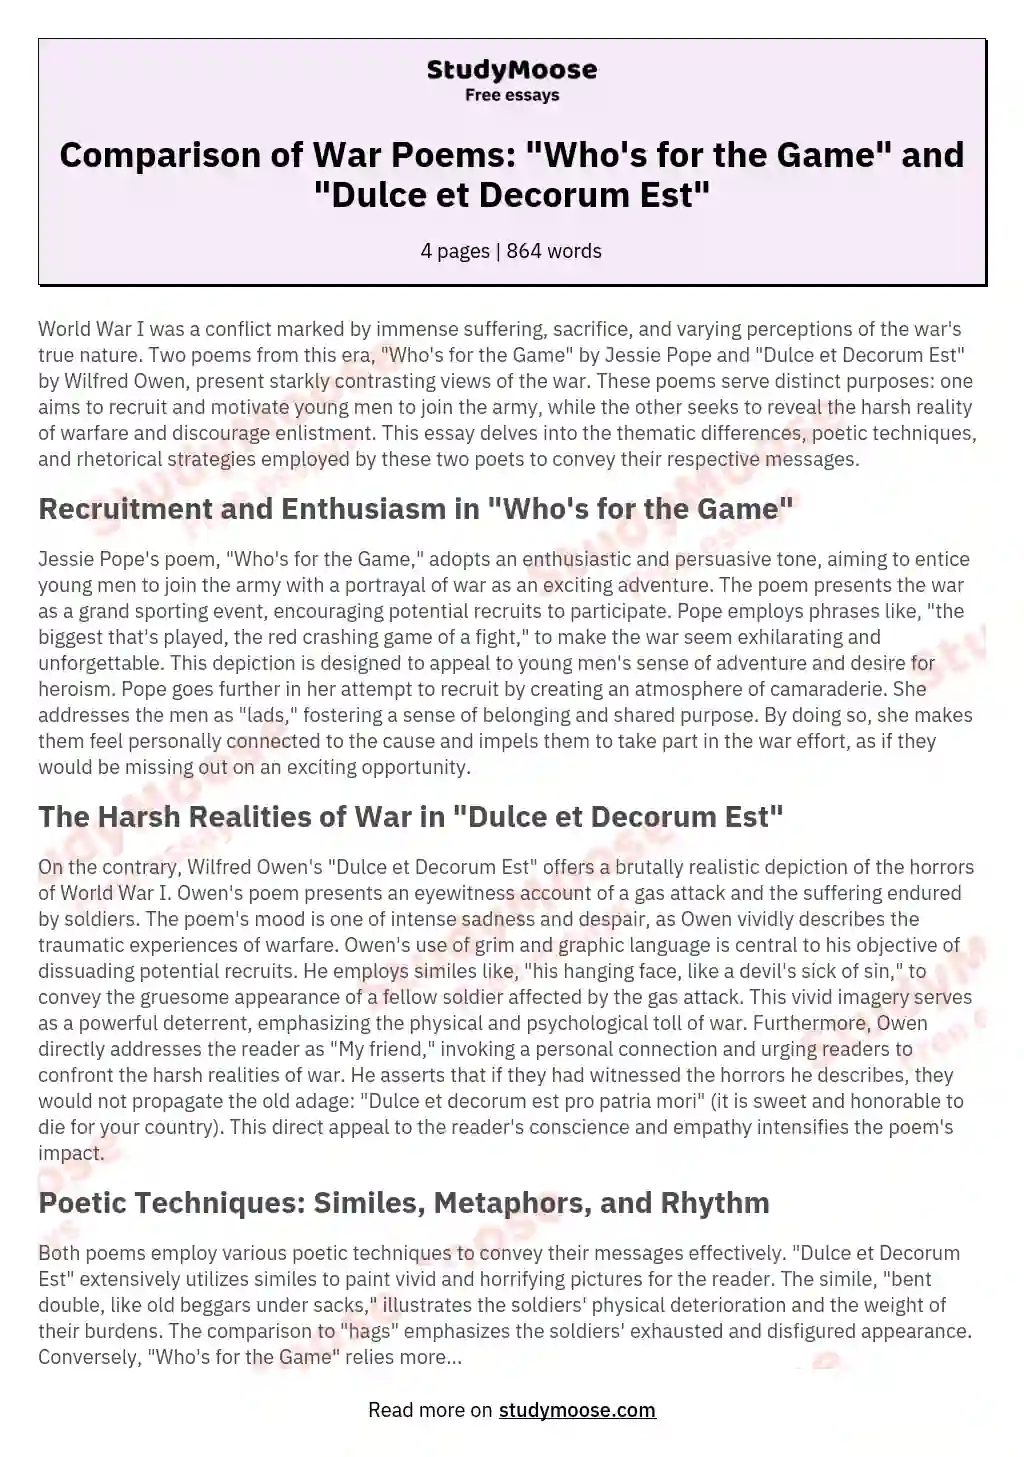 Comparison of War Poems: "Who's for the Game" and "Dulce et Decorum Est" essay